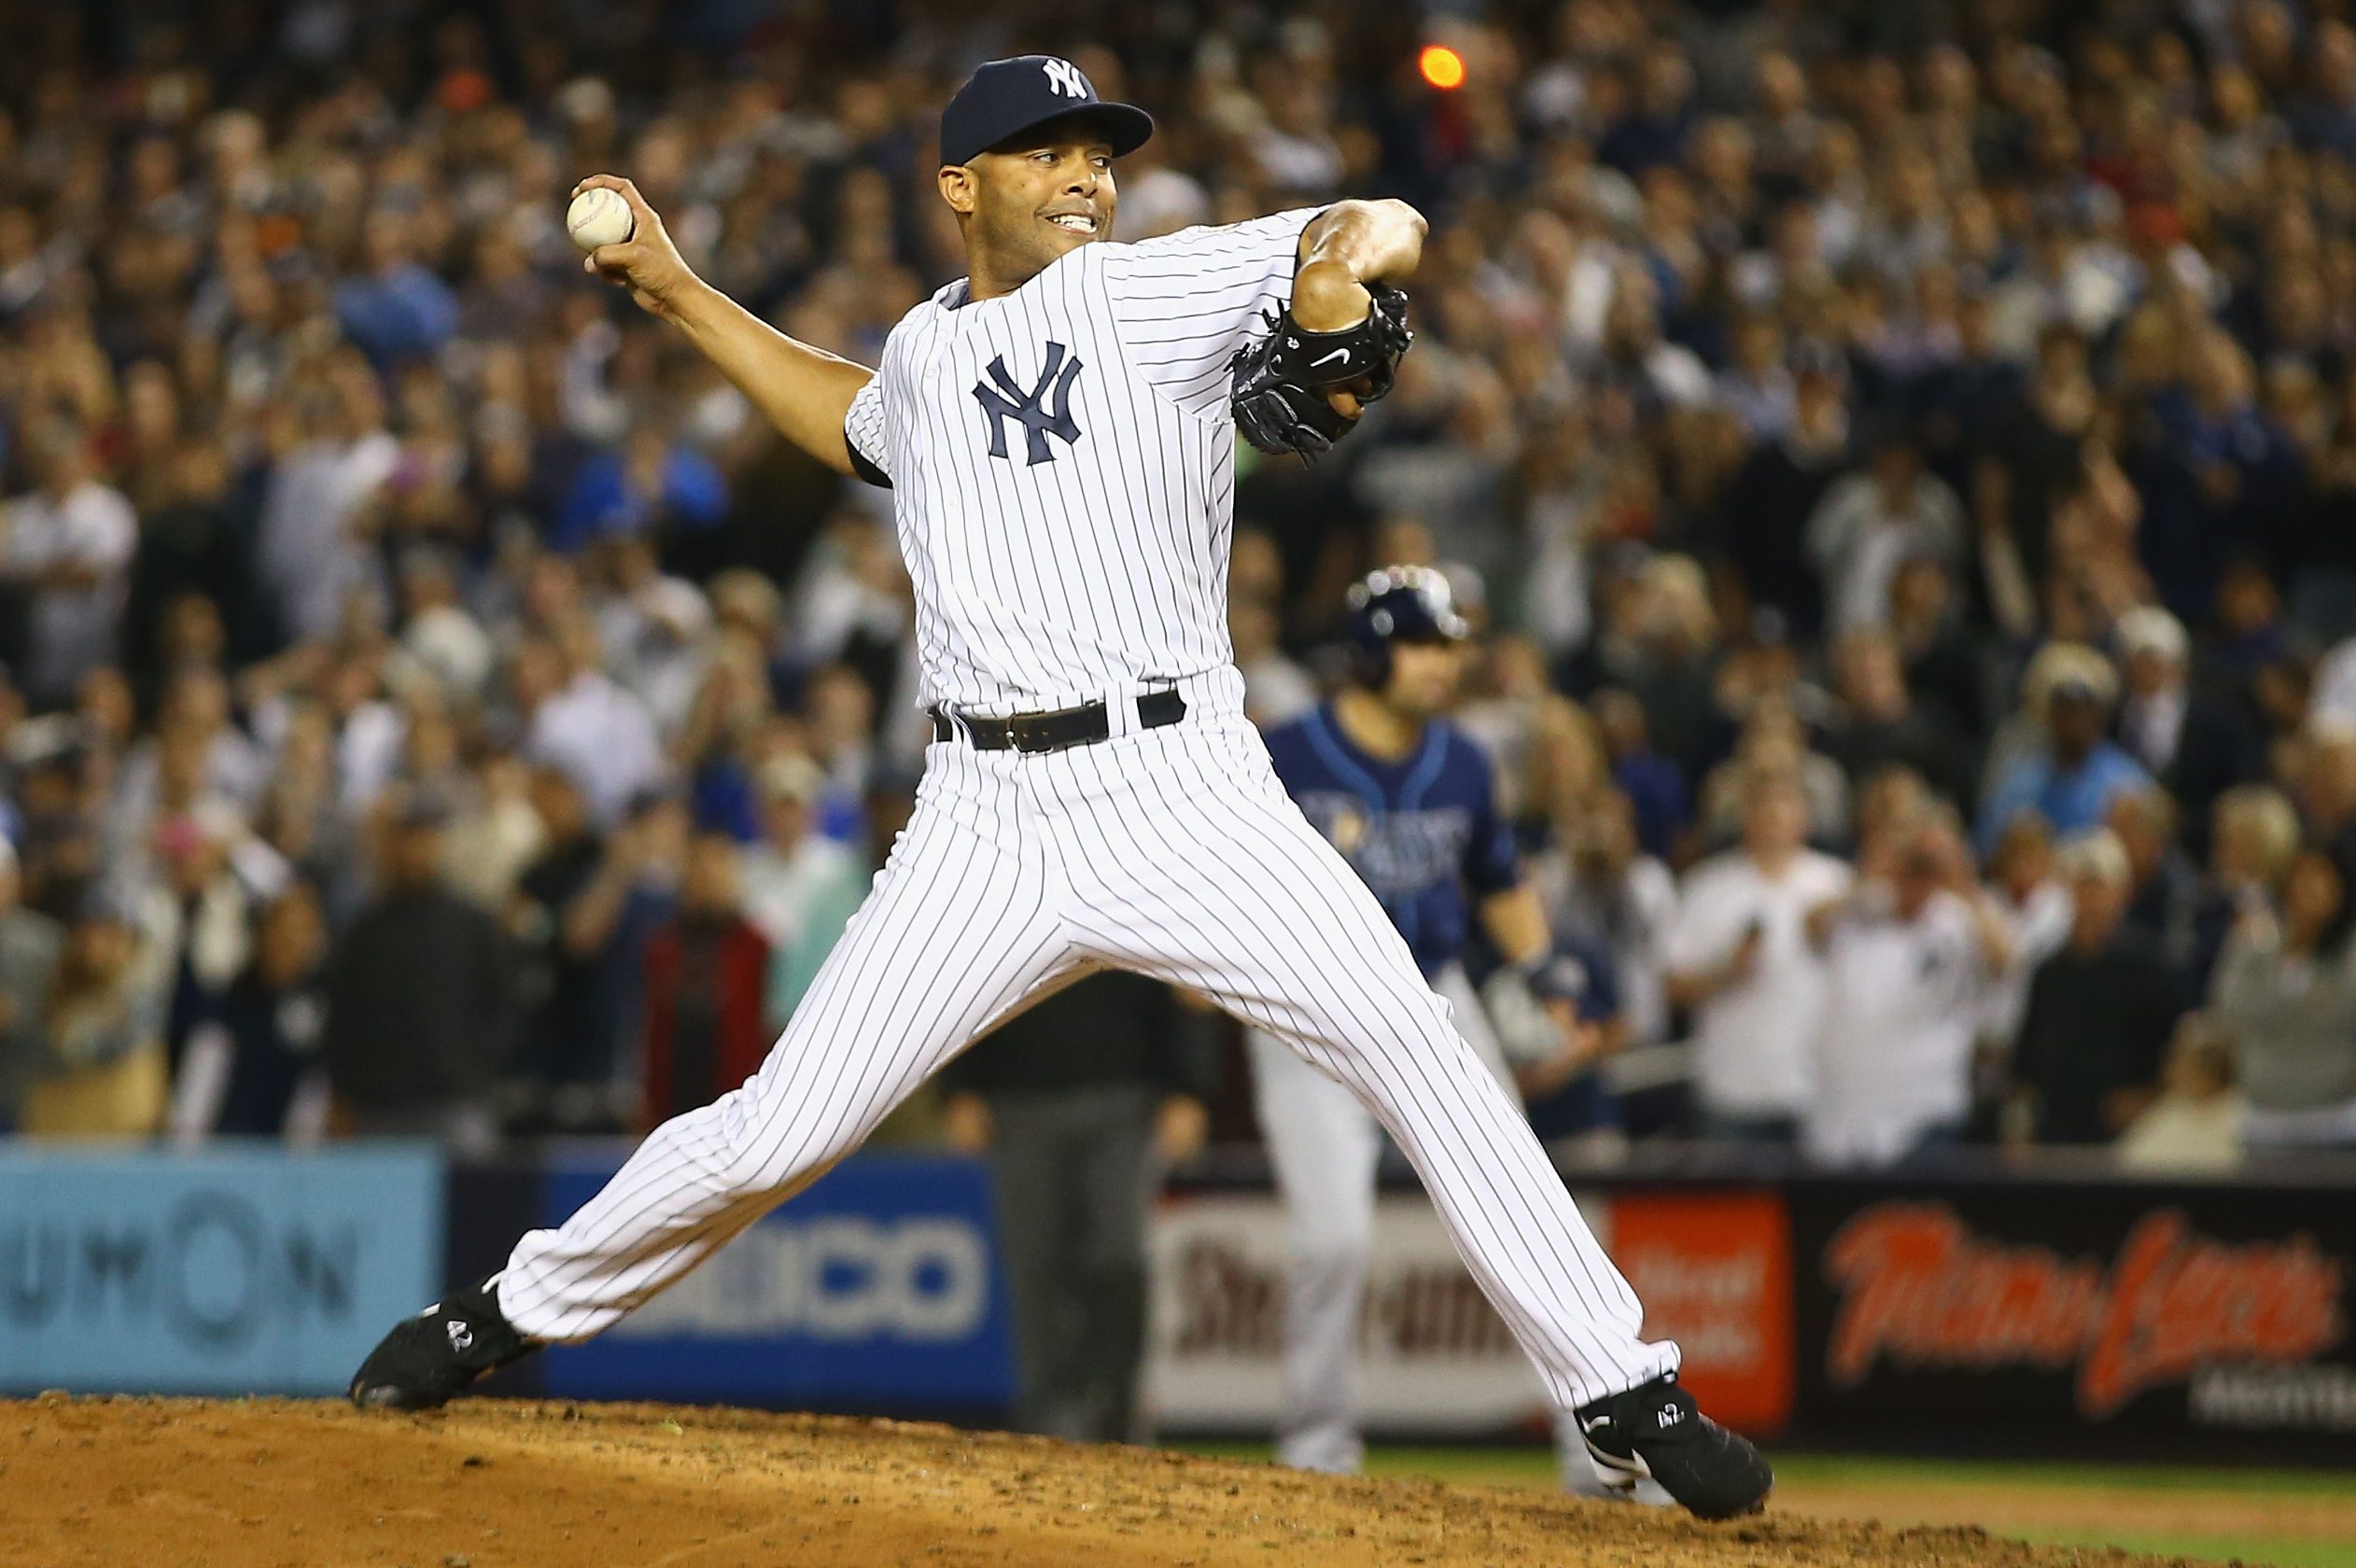 Mariano Rivera's Son Jafet Details Having The Sandman for a Dad